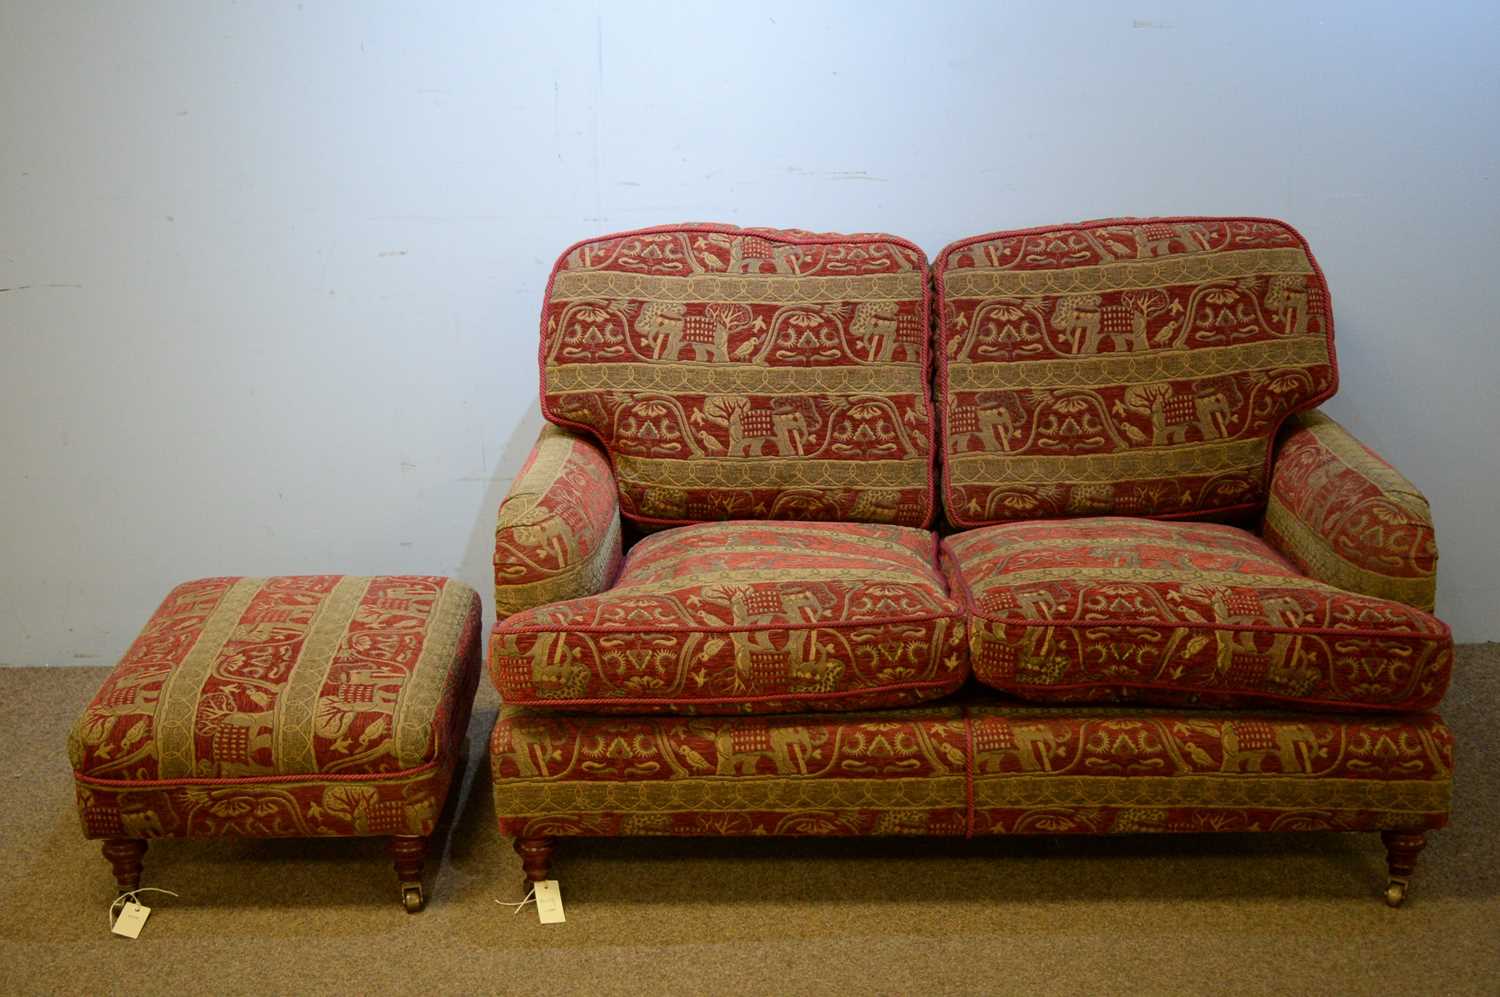 Lot 6 - Two-seater sofa and matching footstool.